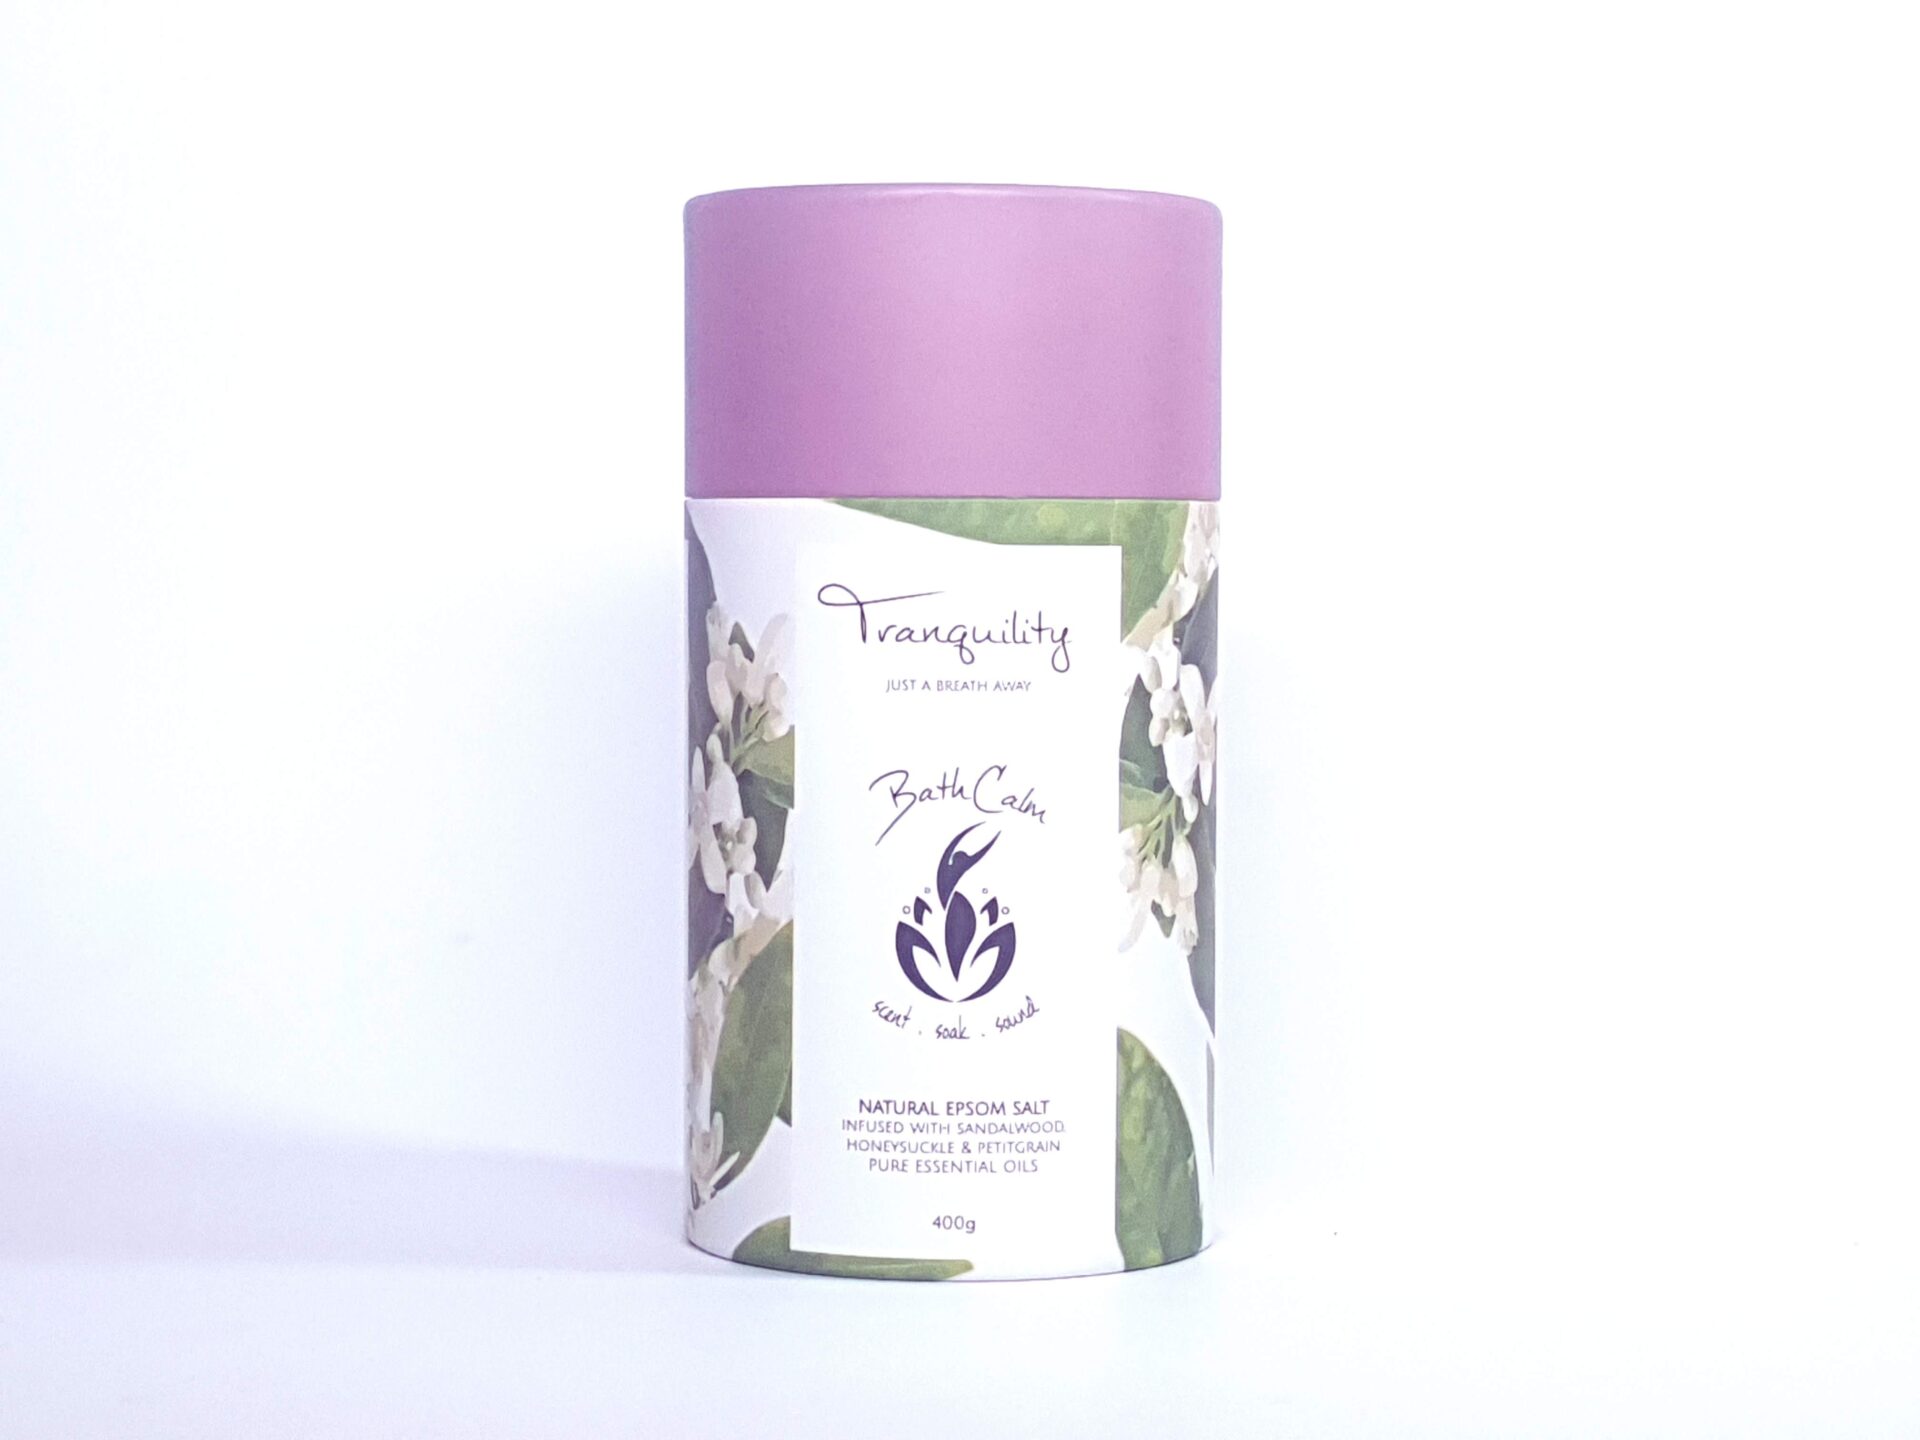 BathCalm Tranquility Meditation Soak helps you to relax and unwind. Set in a beautiful cylinder with honeysuckle graphics, BathCalm Tranquility includes Sandalwood, Honeysuckle and Petitgrain pure essential oils.